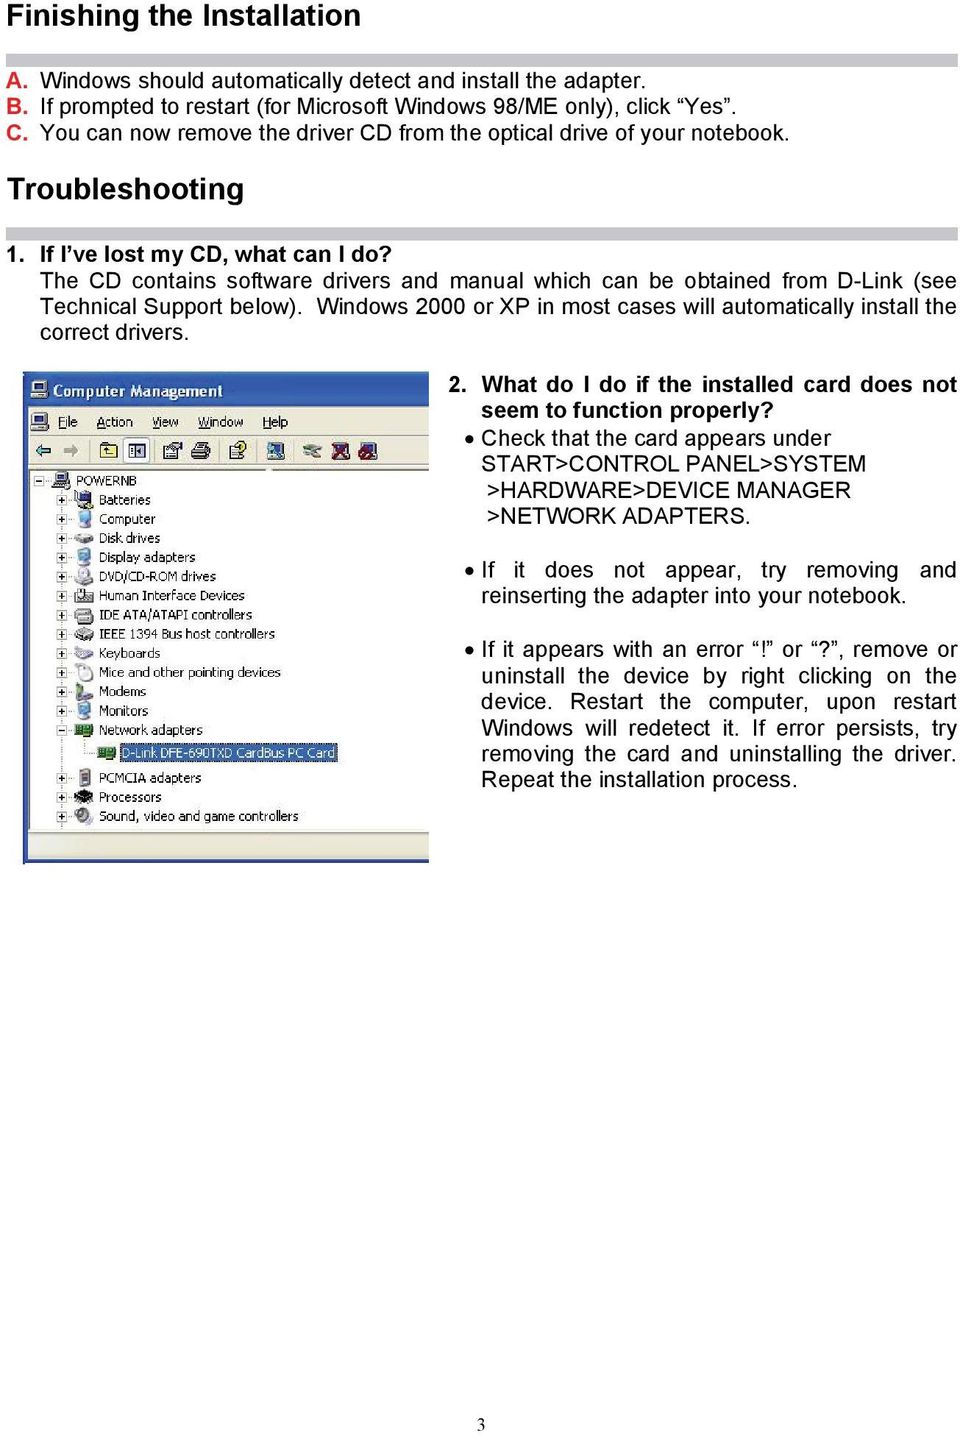 The CD contains software drivers and manual which can be obtained from D-Link (see Technical Support below). Windows 2000 or XP in most cases will automatically install the correct drivers. 2. What do I do if the installed card does not seem to function properly?